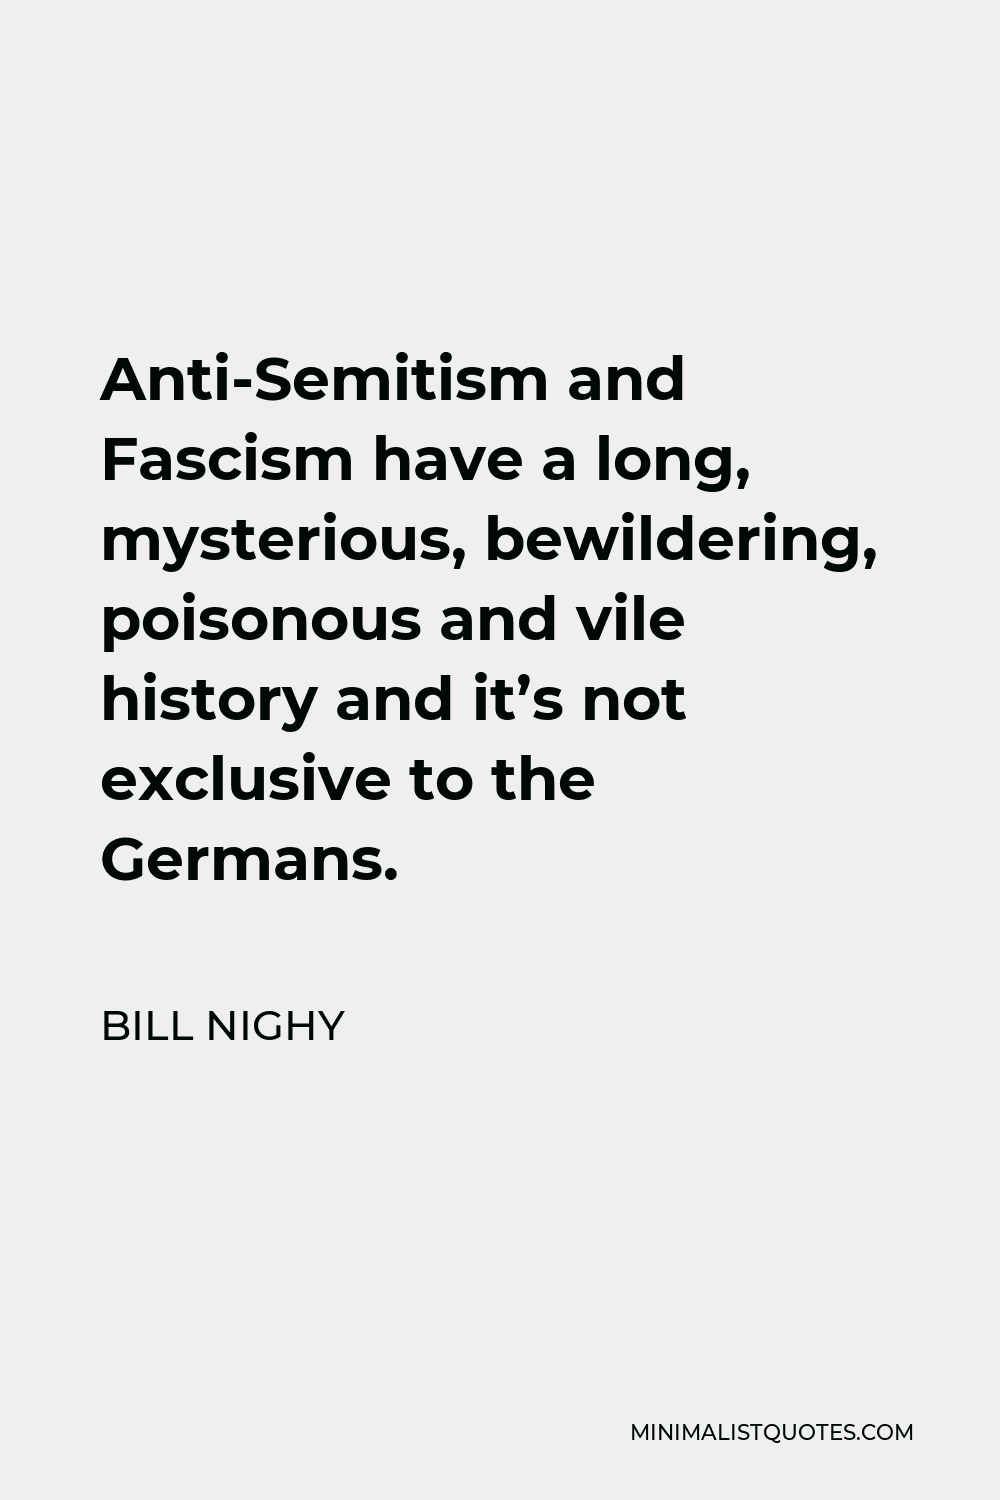 Bill Nighy Quote - Anti-Semitism and Fascism have a long, mysterious, bewildering, poisonous and vile history and it’s not exclusive to the Germans.